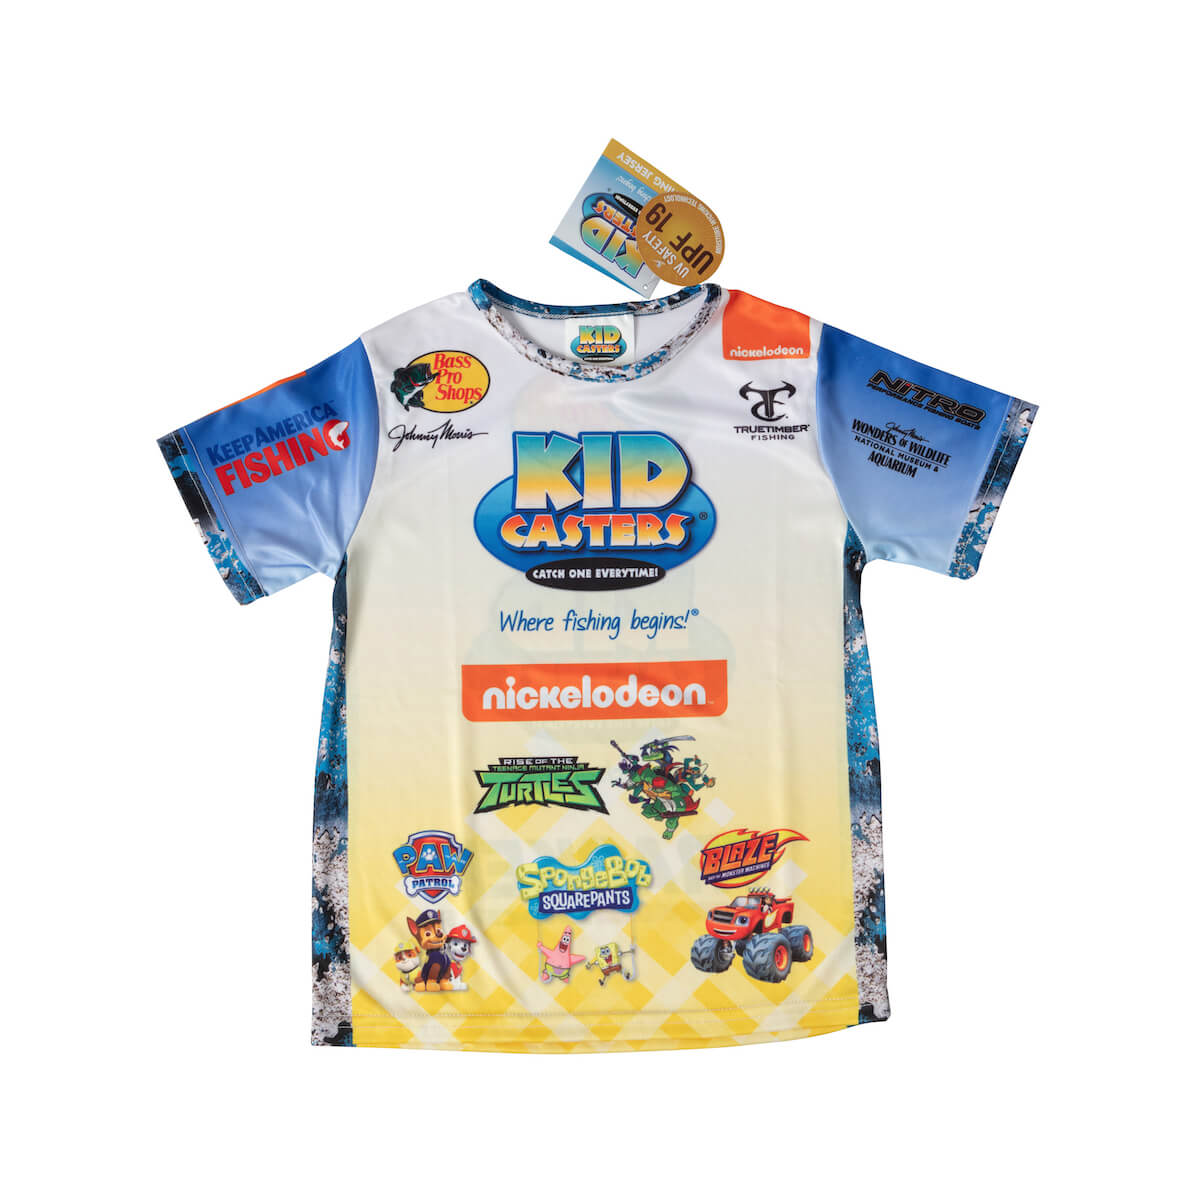 https://www.kidcasters.com/wp-content/uploads/apb-kidcasters-product-fishingjerseys-boys-back-1200a-1.jpg